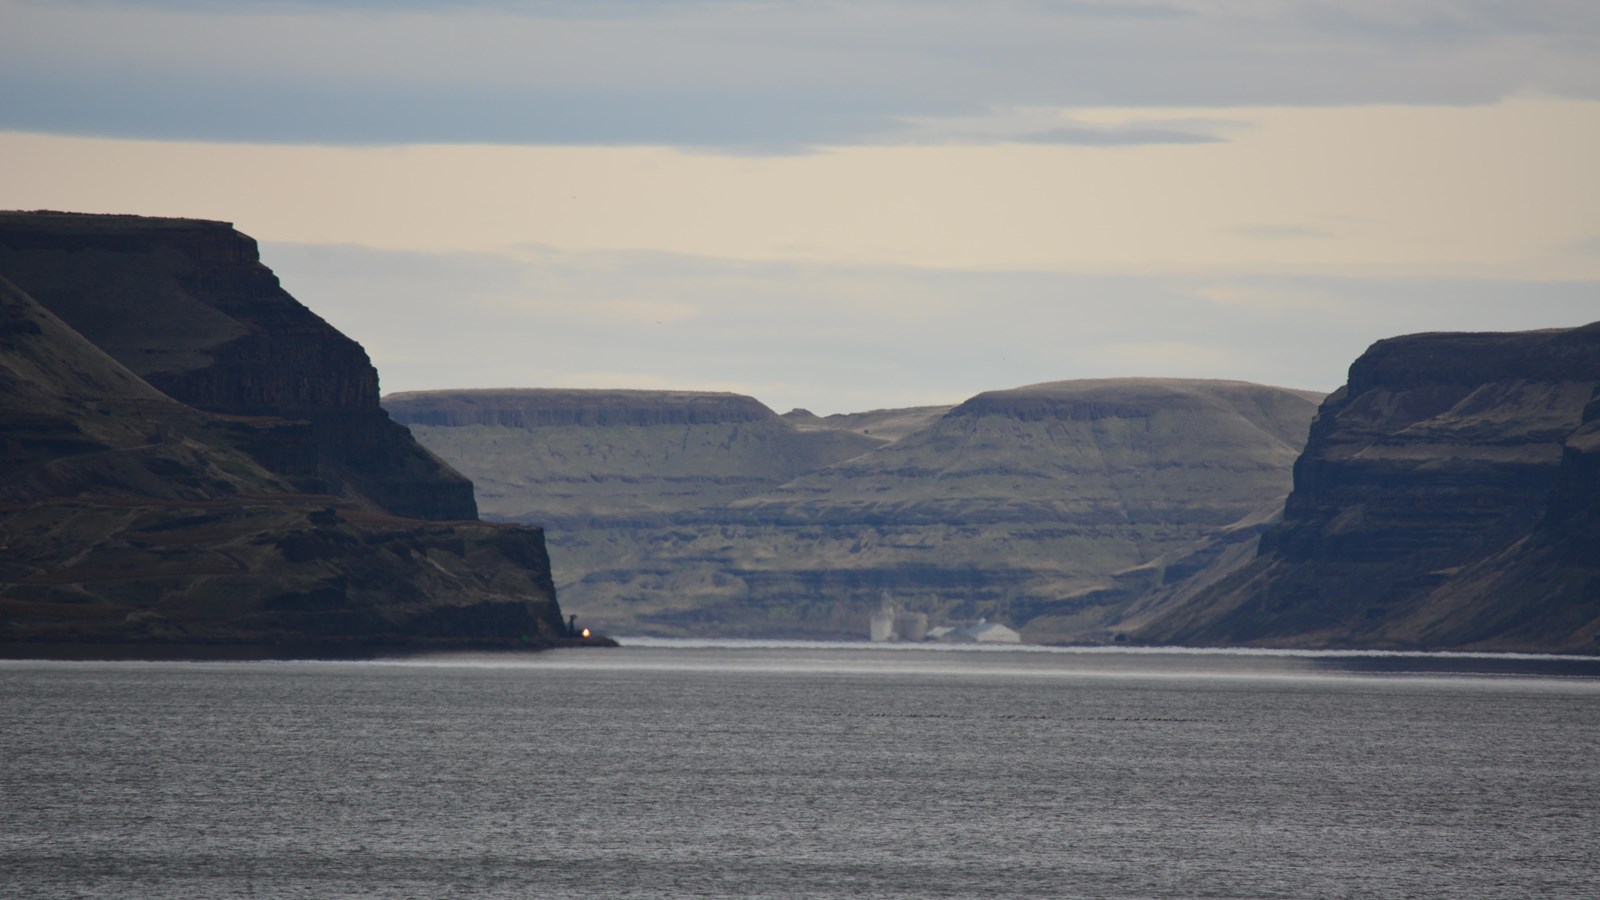 Looking at the Columbia River with buttes on either side